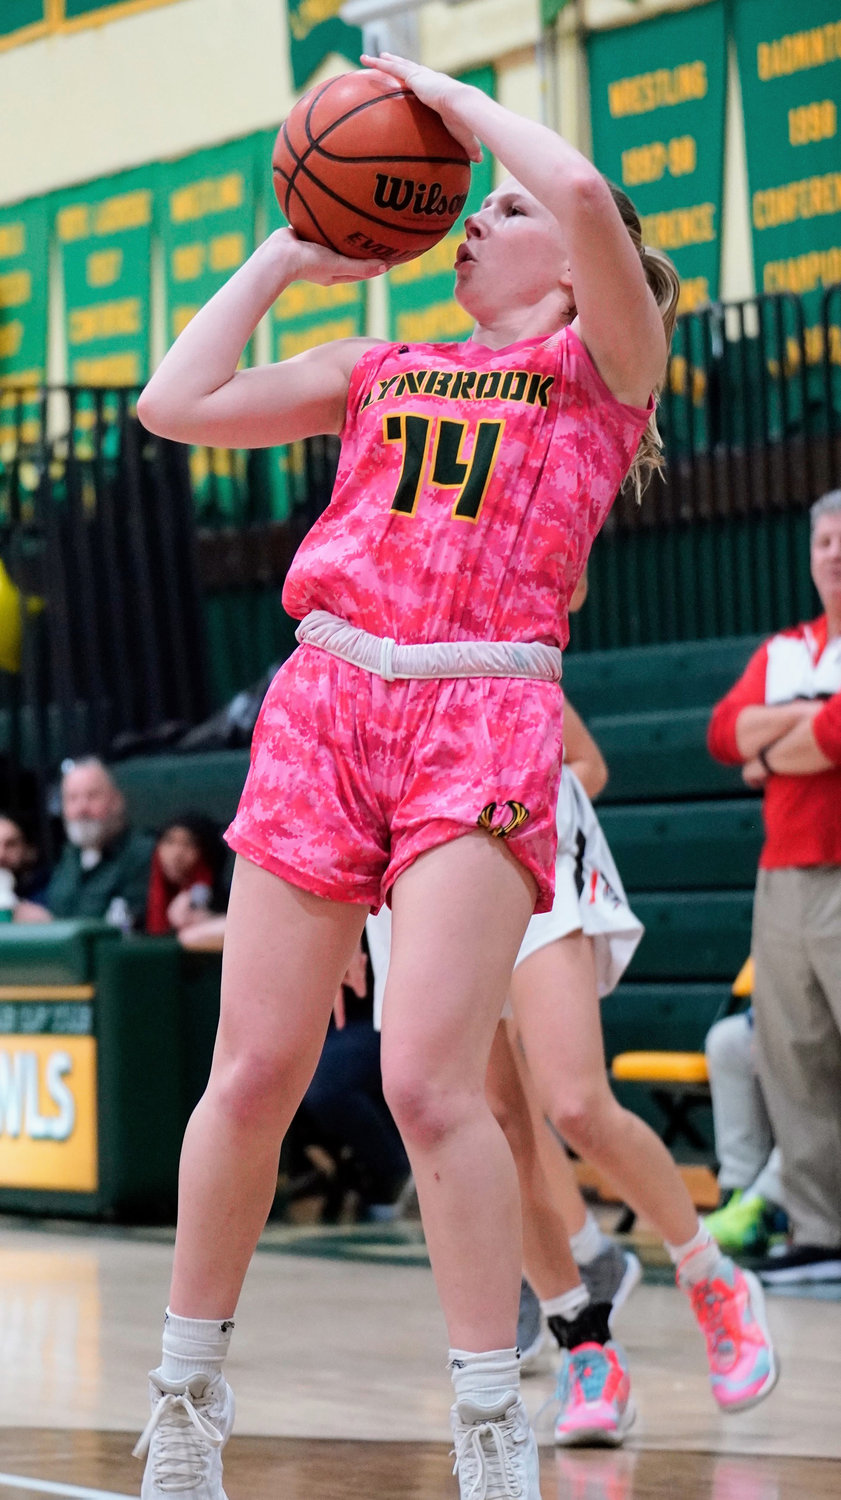 Senior Kaelynn O'Brien had 15 points and helped lead a stellar defensive effort Monday night as Lynbrook knocked off Floral Park in the Class A semifinals.